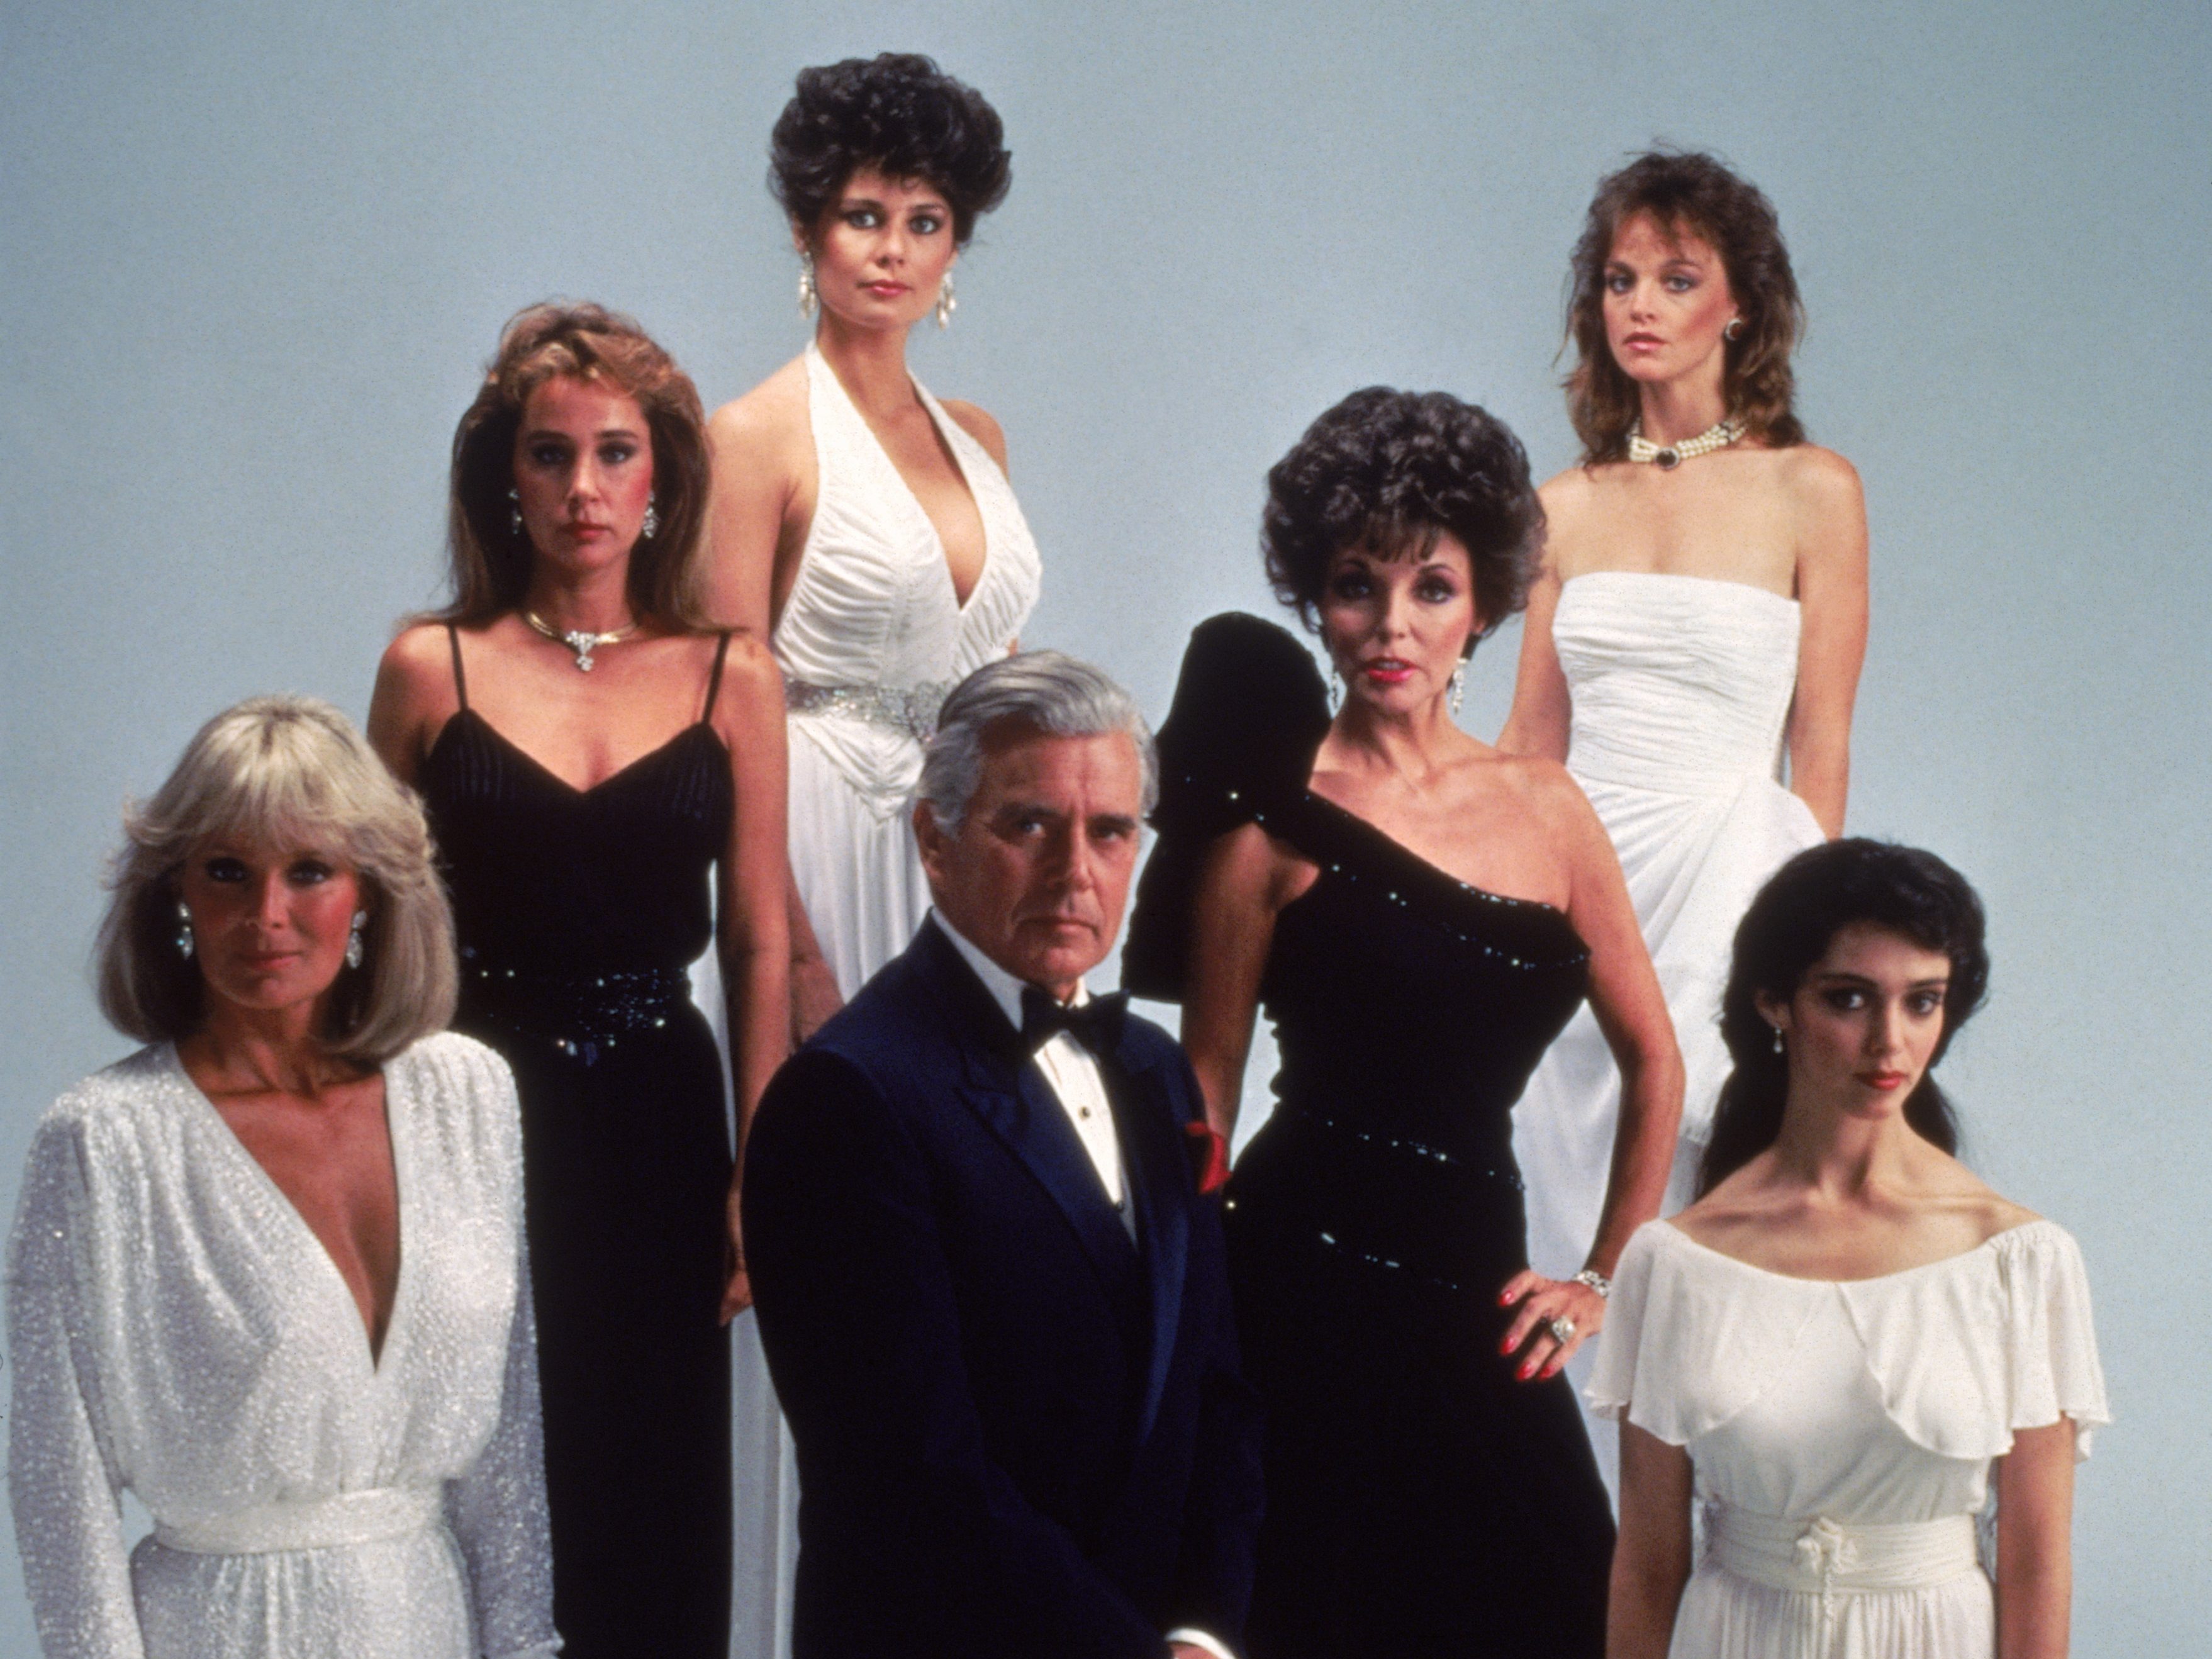 Promotional portrait of the Dynasty cast, 1983 